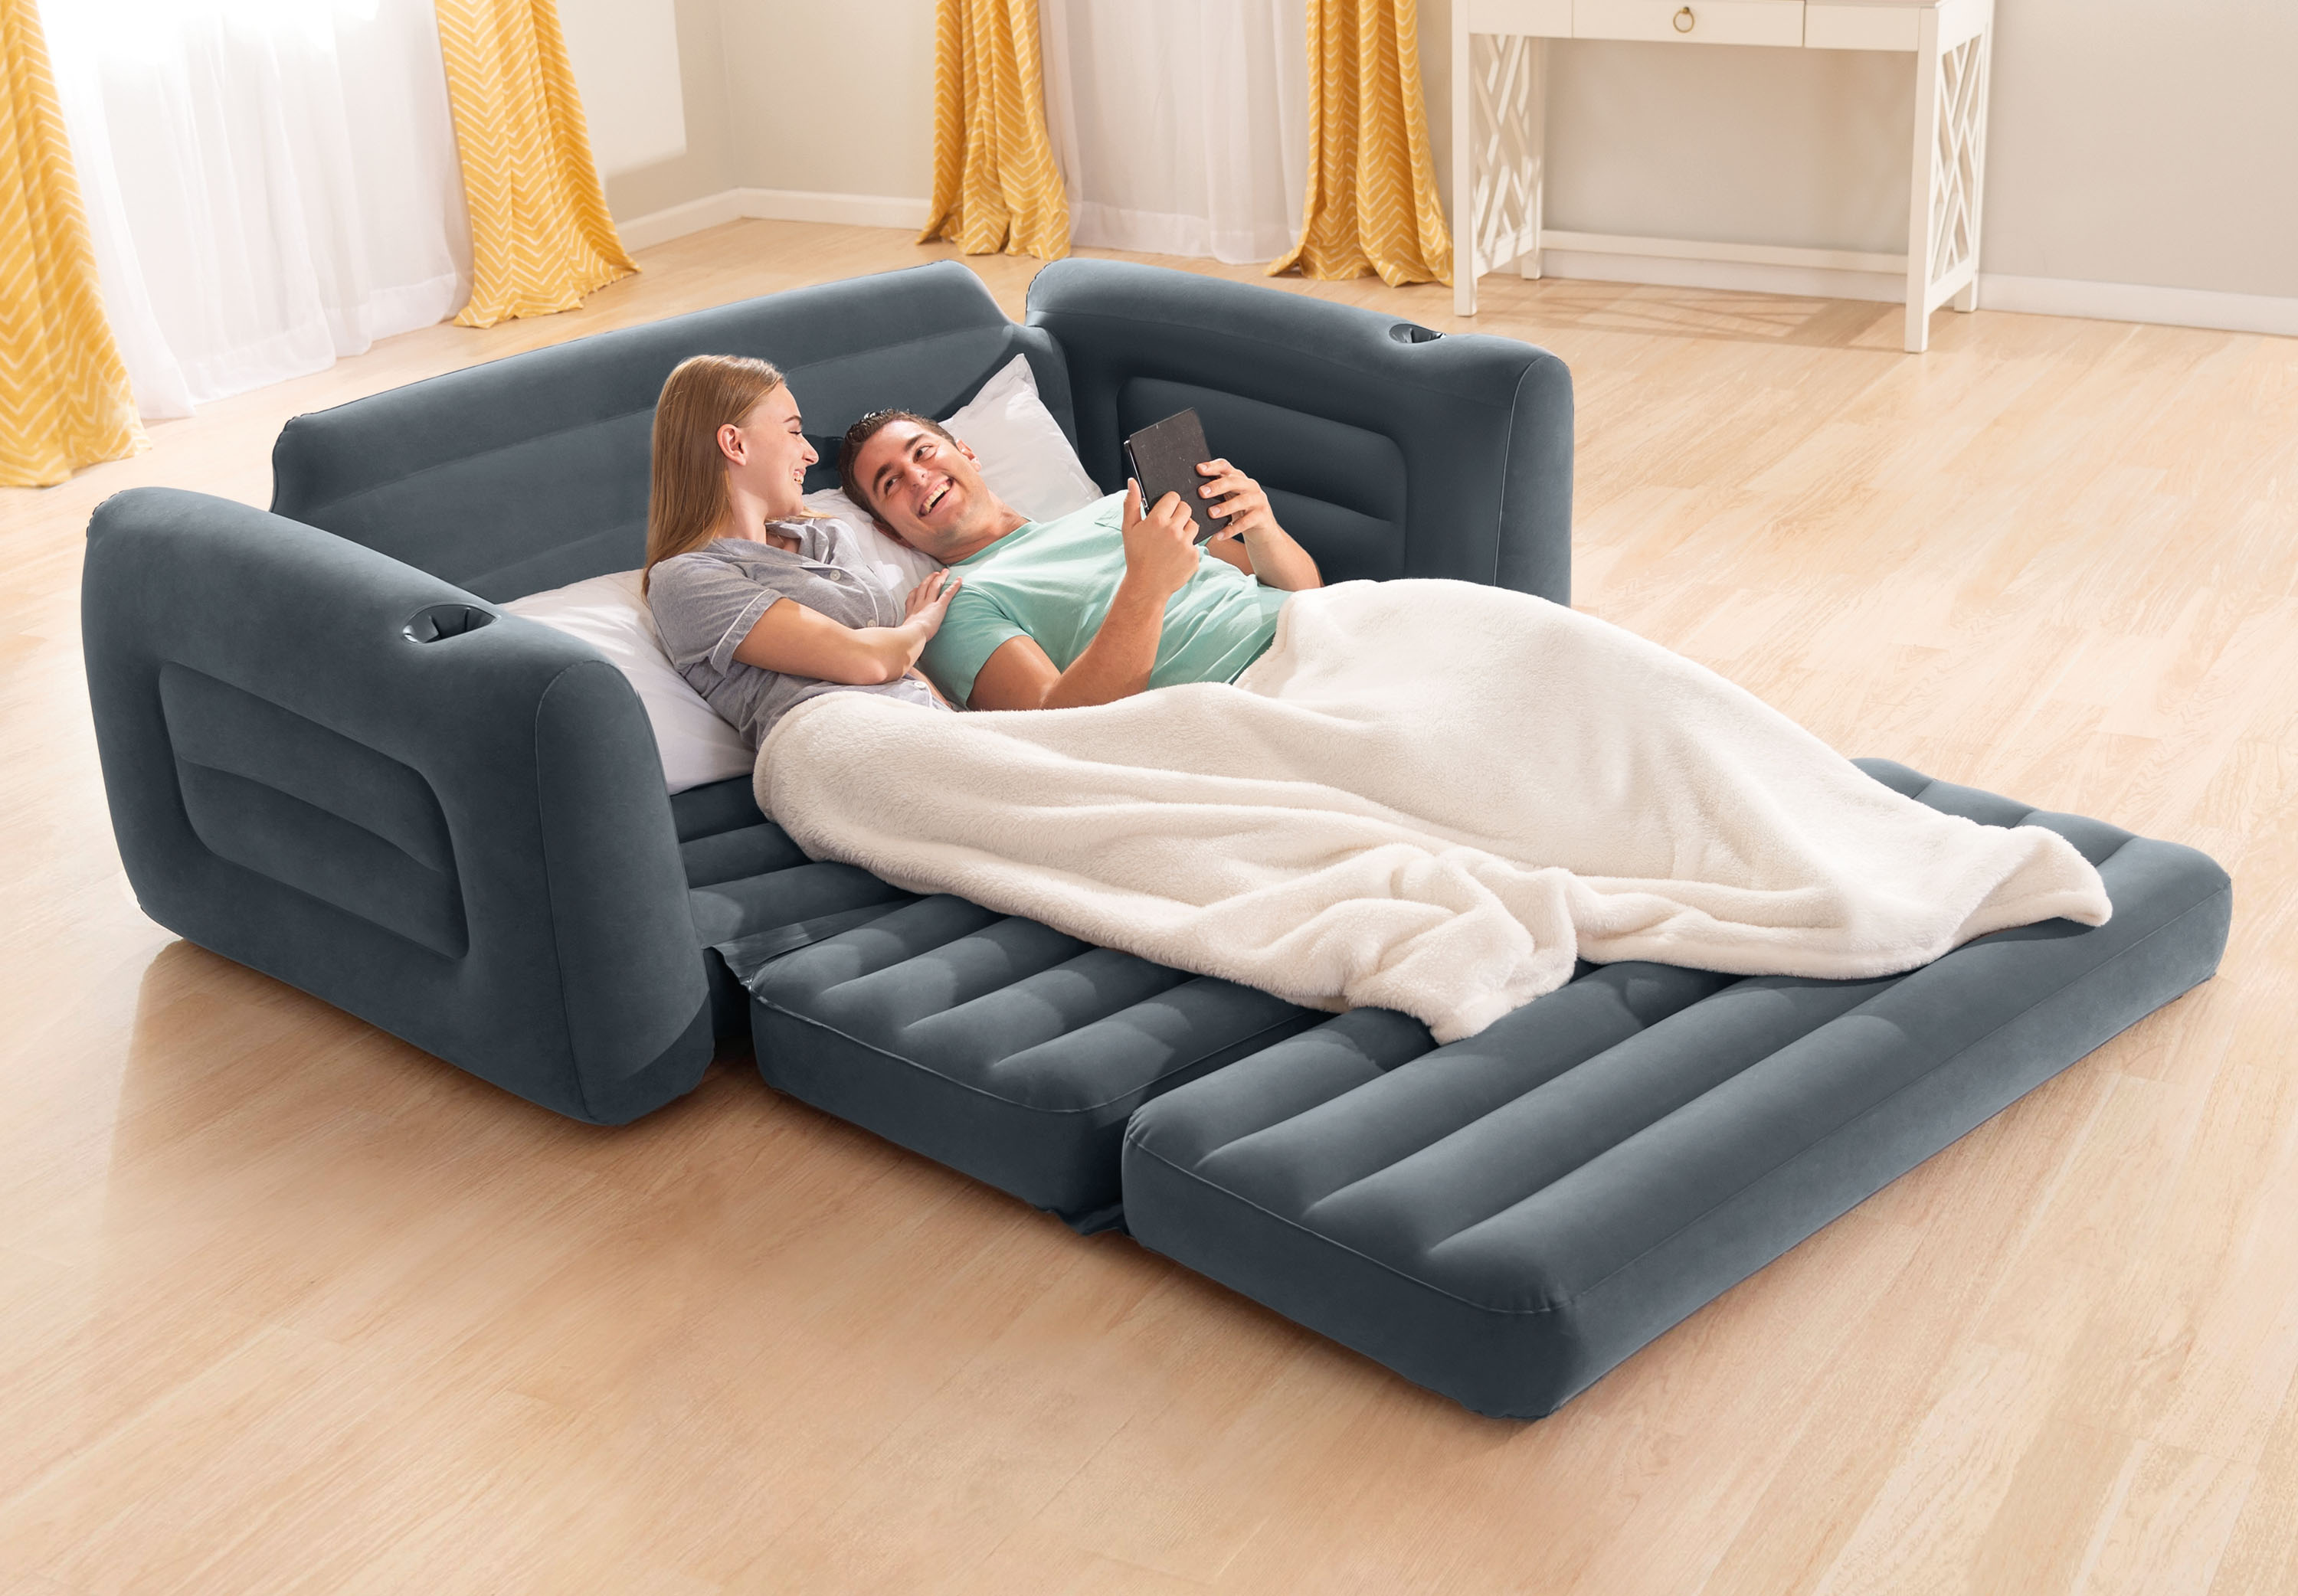 Intex Queen Size Inflatable PullOut Sofa Bed Sleep Away